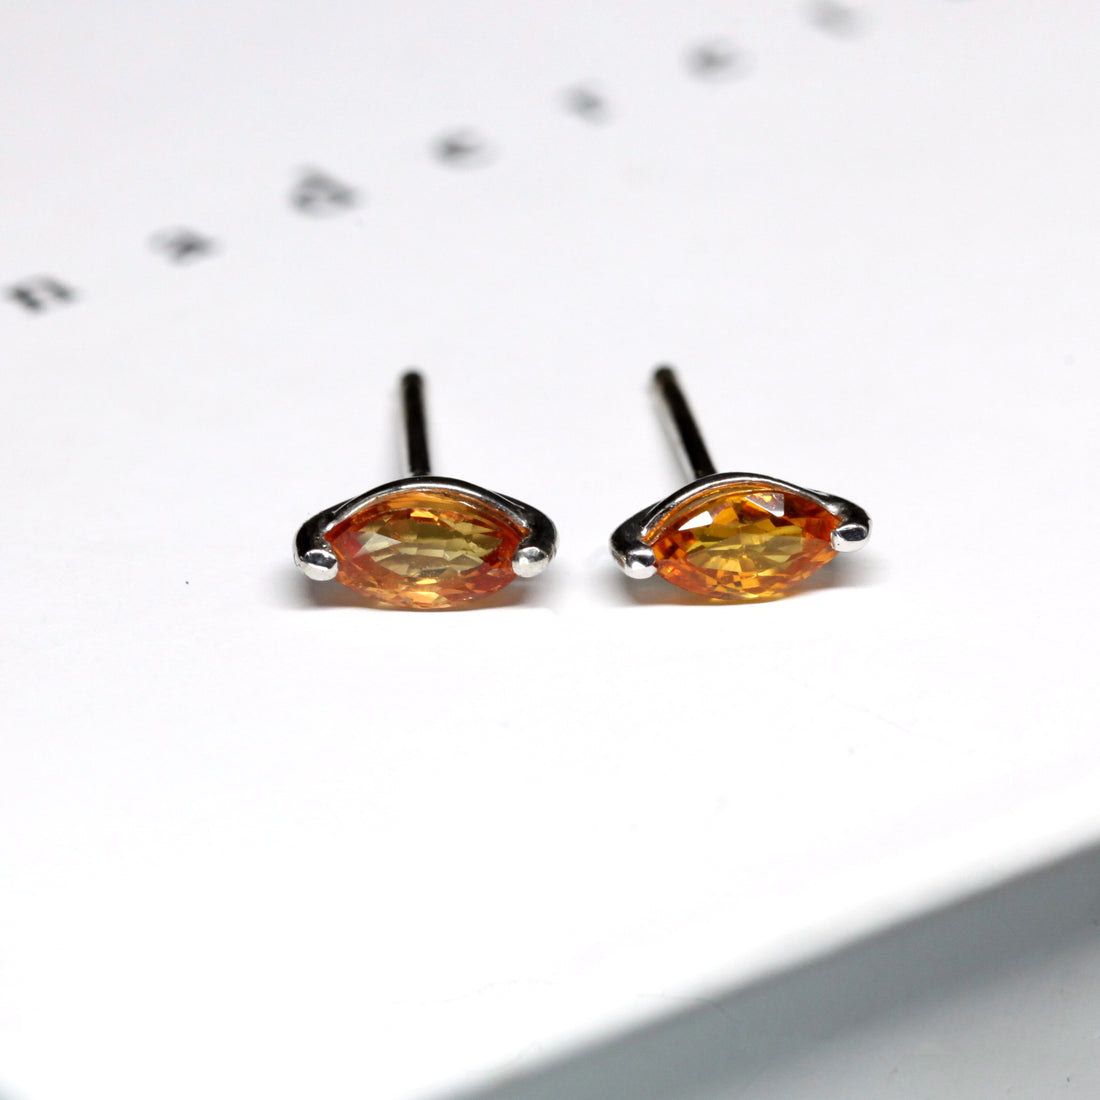 front view of gemstone stud earrings bena jewelry montreal orange gemstone stud earrings custom maed jewelry in montreal handmade in canada minimalist unisex edgy jewelry